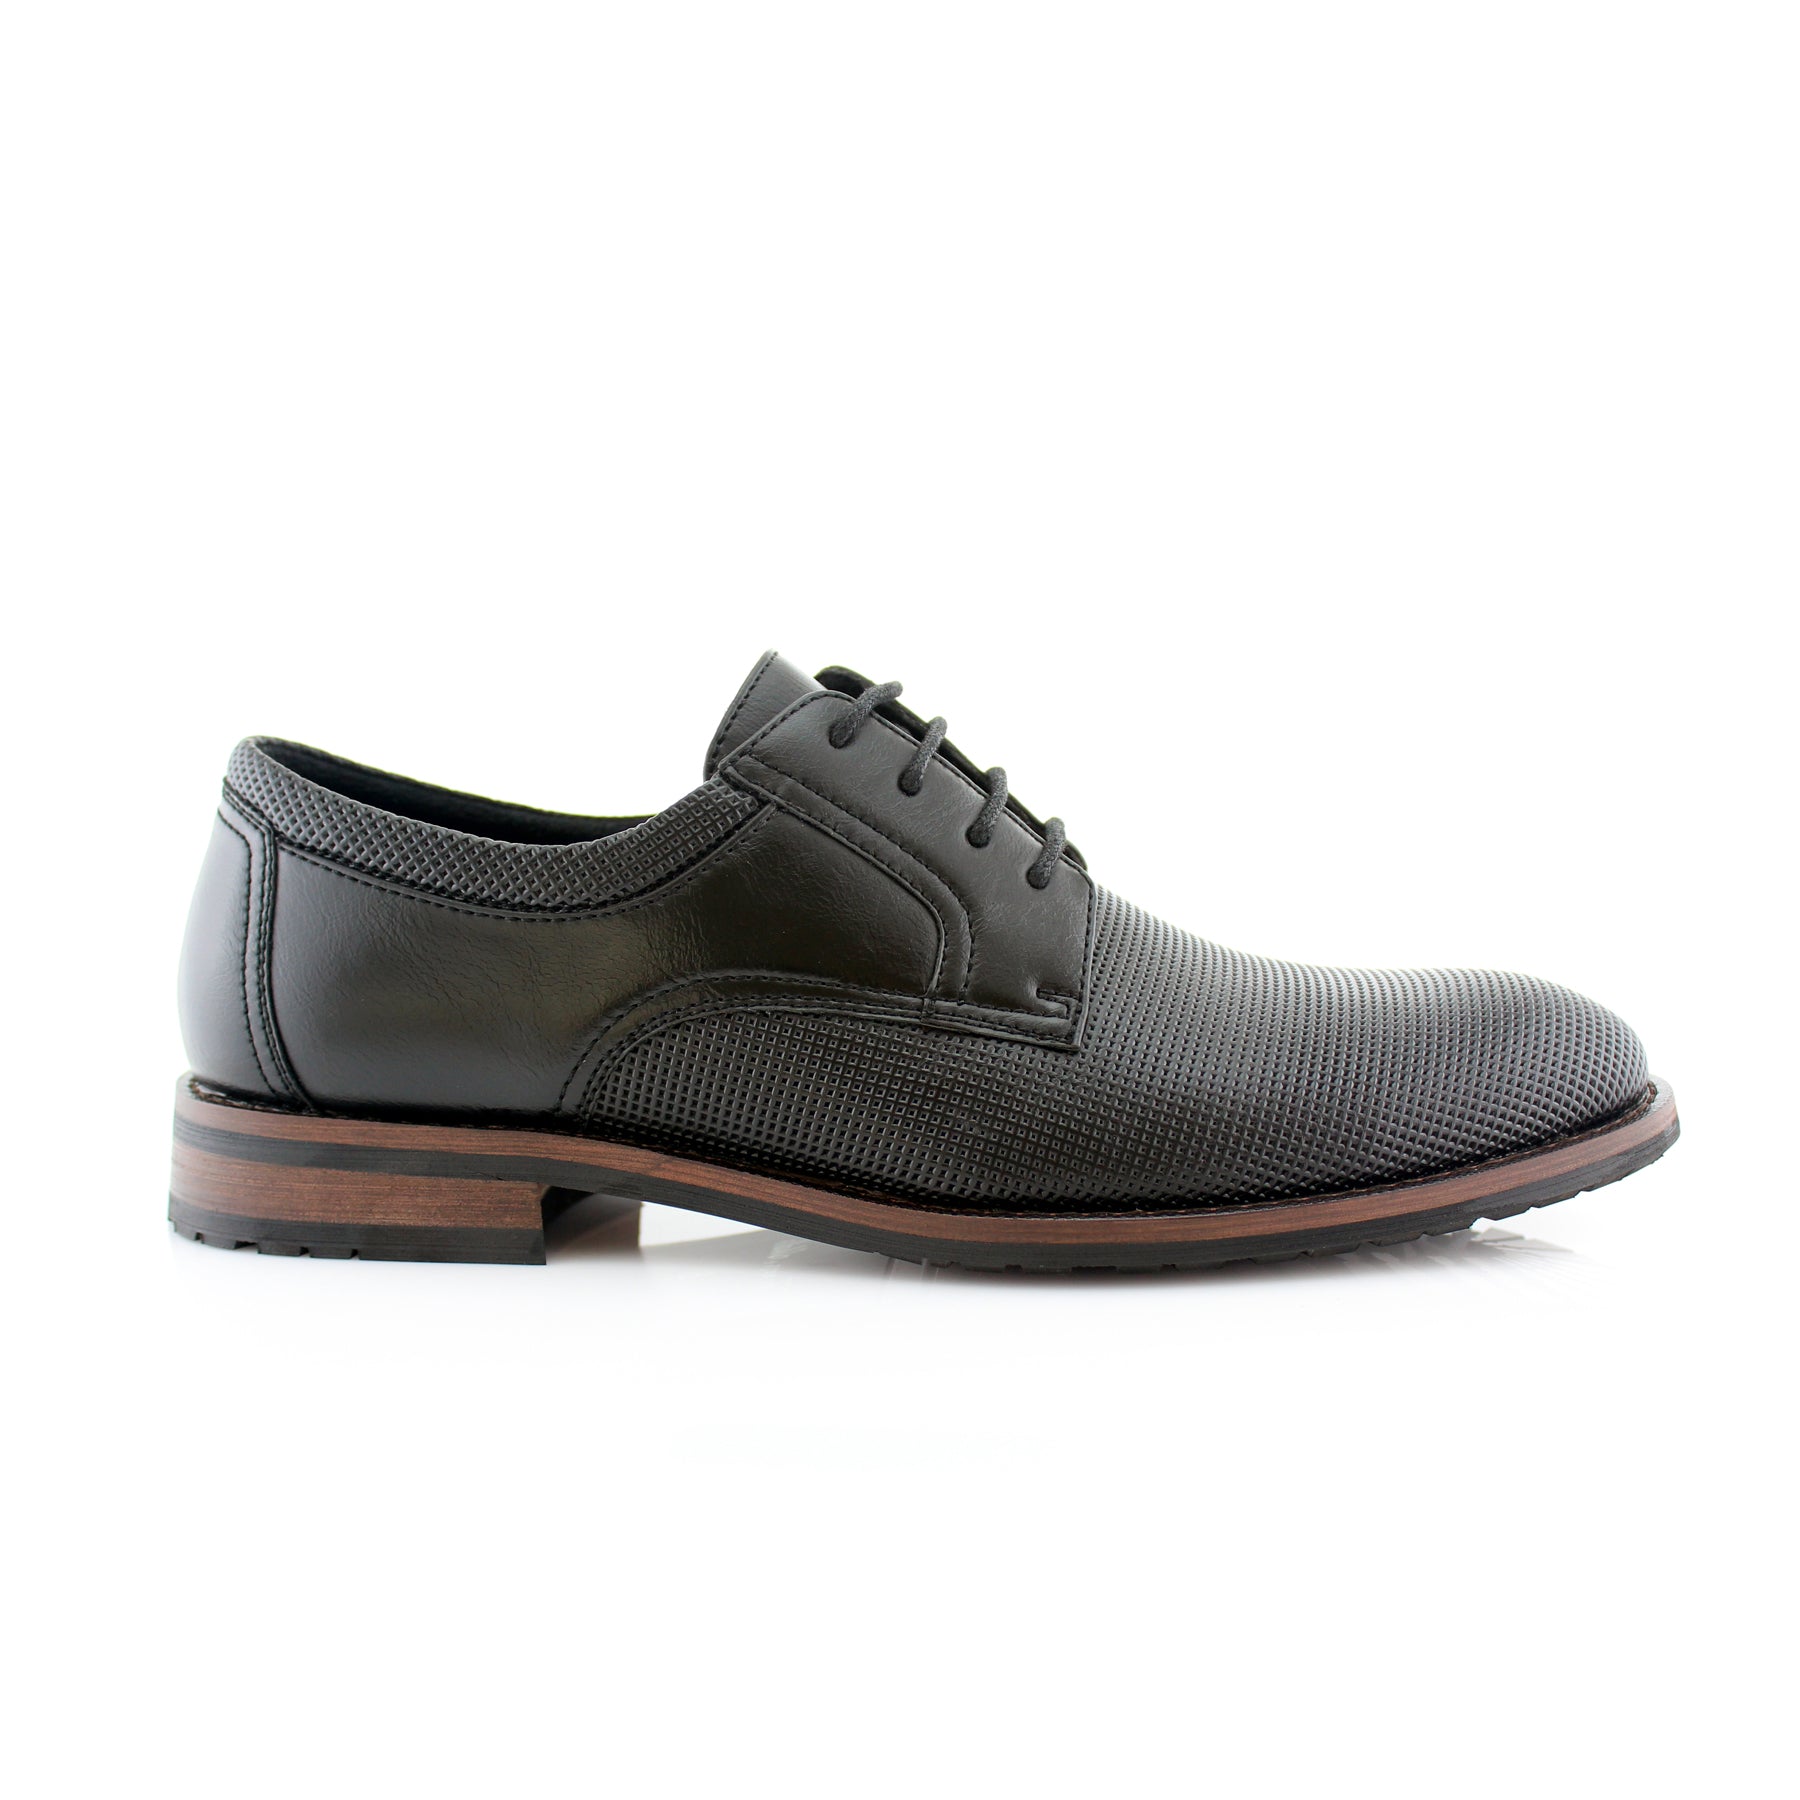 Duo-Textured Embossed Derby Shoes | Martin by Ferro Aldo | Conal Footwear | Outer Side Angle View